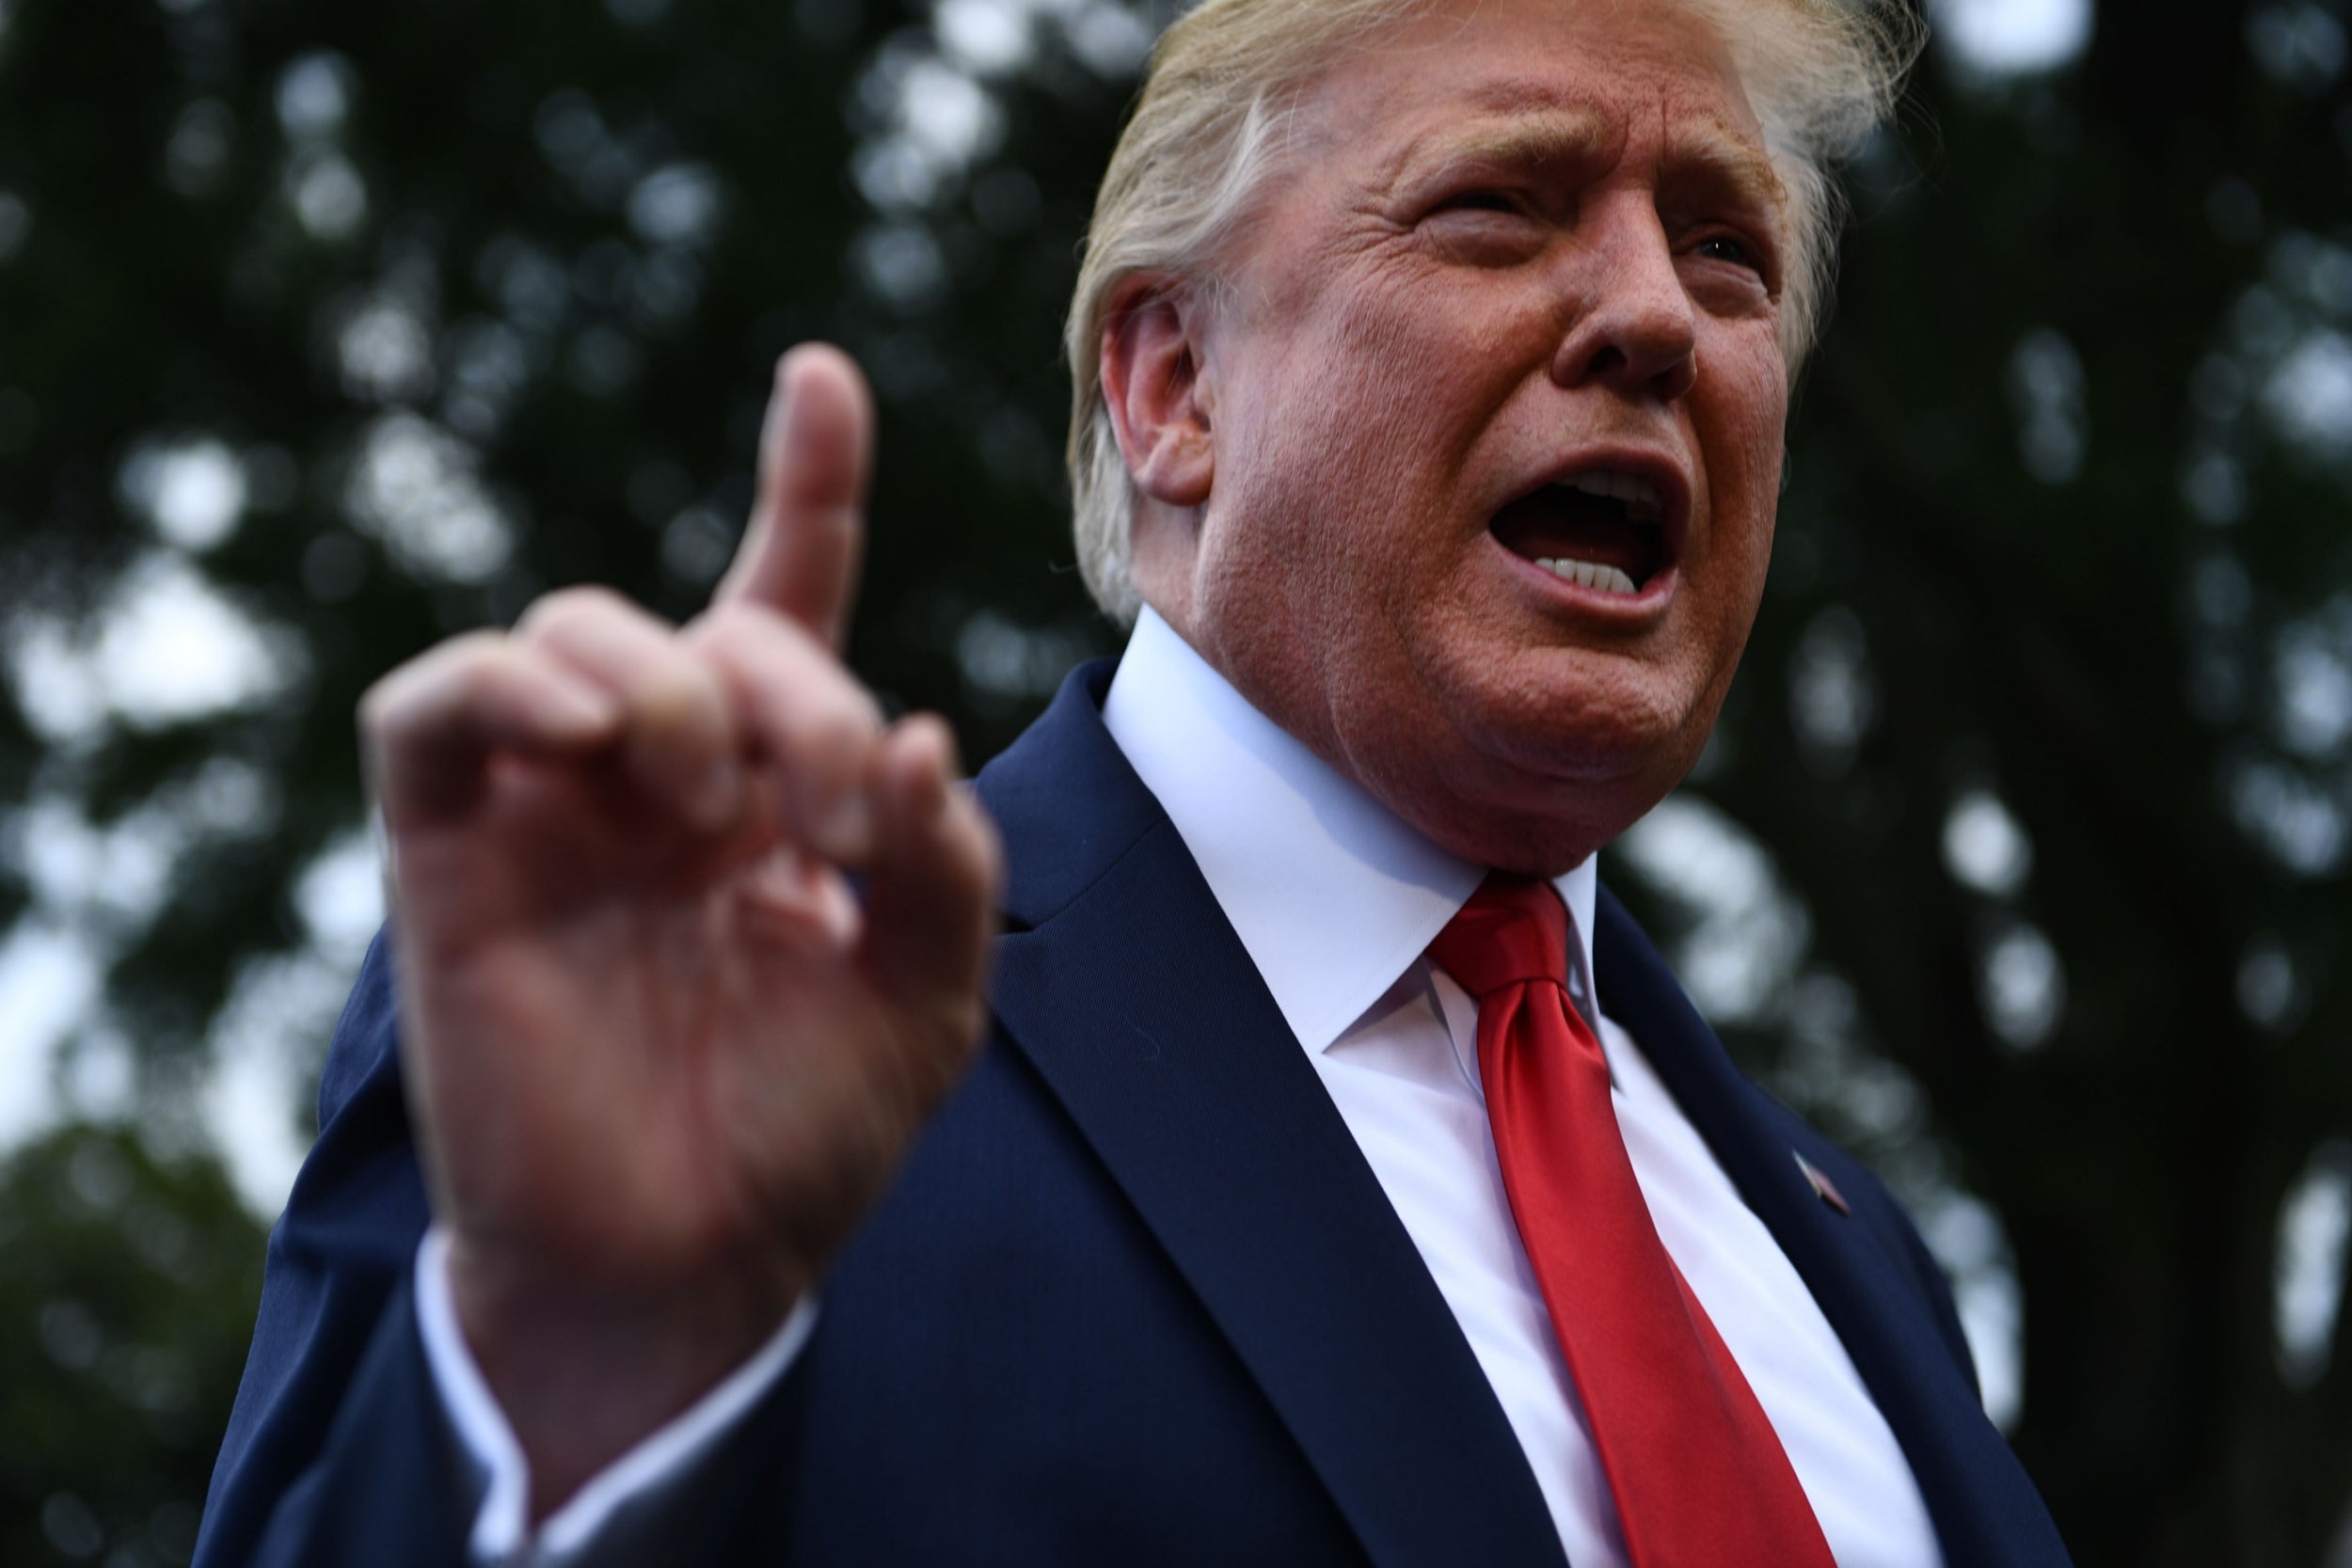 Trump news - live: President mocked for ironic golf tweet, as Ilhan Omar brands him 'fascist' over racist attacks